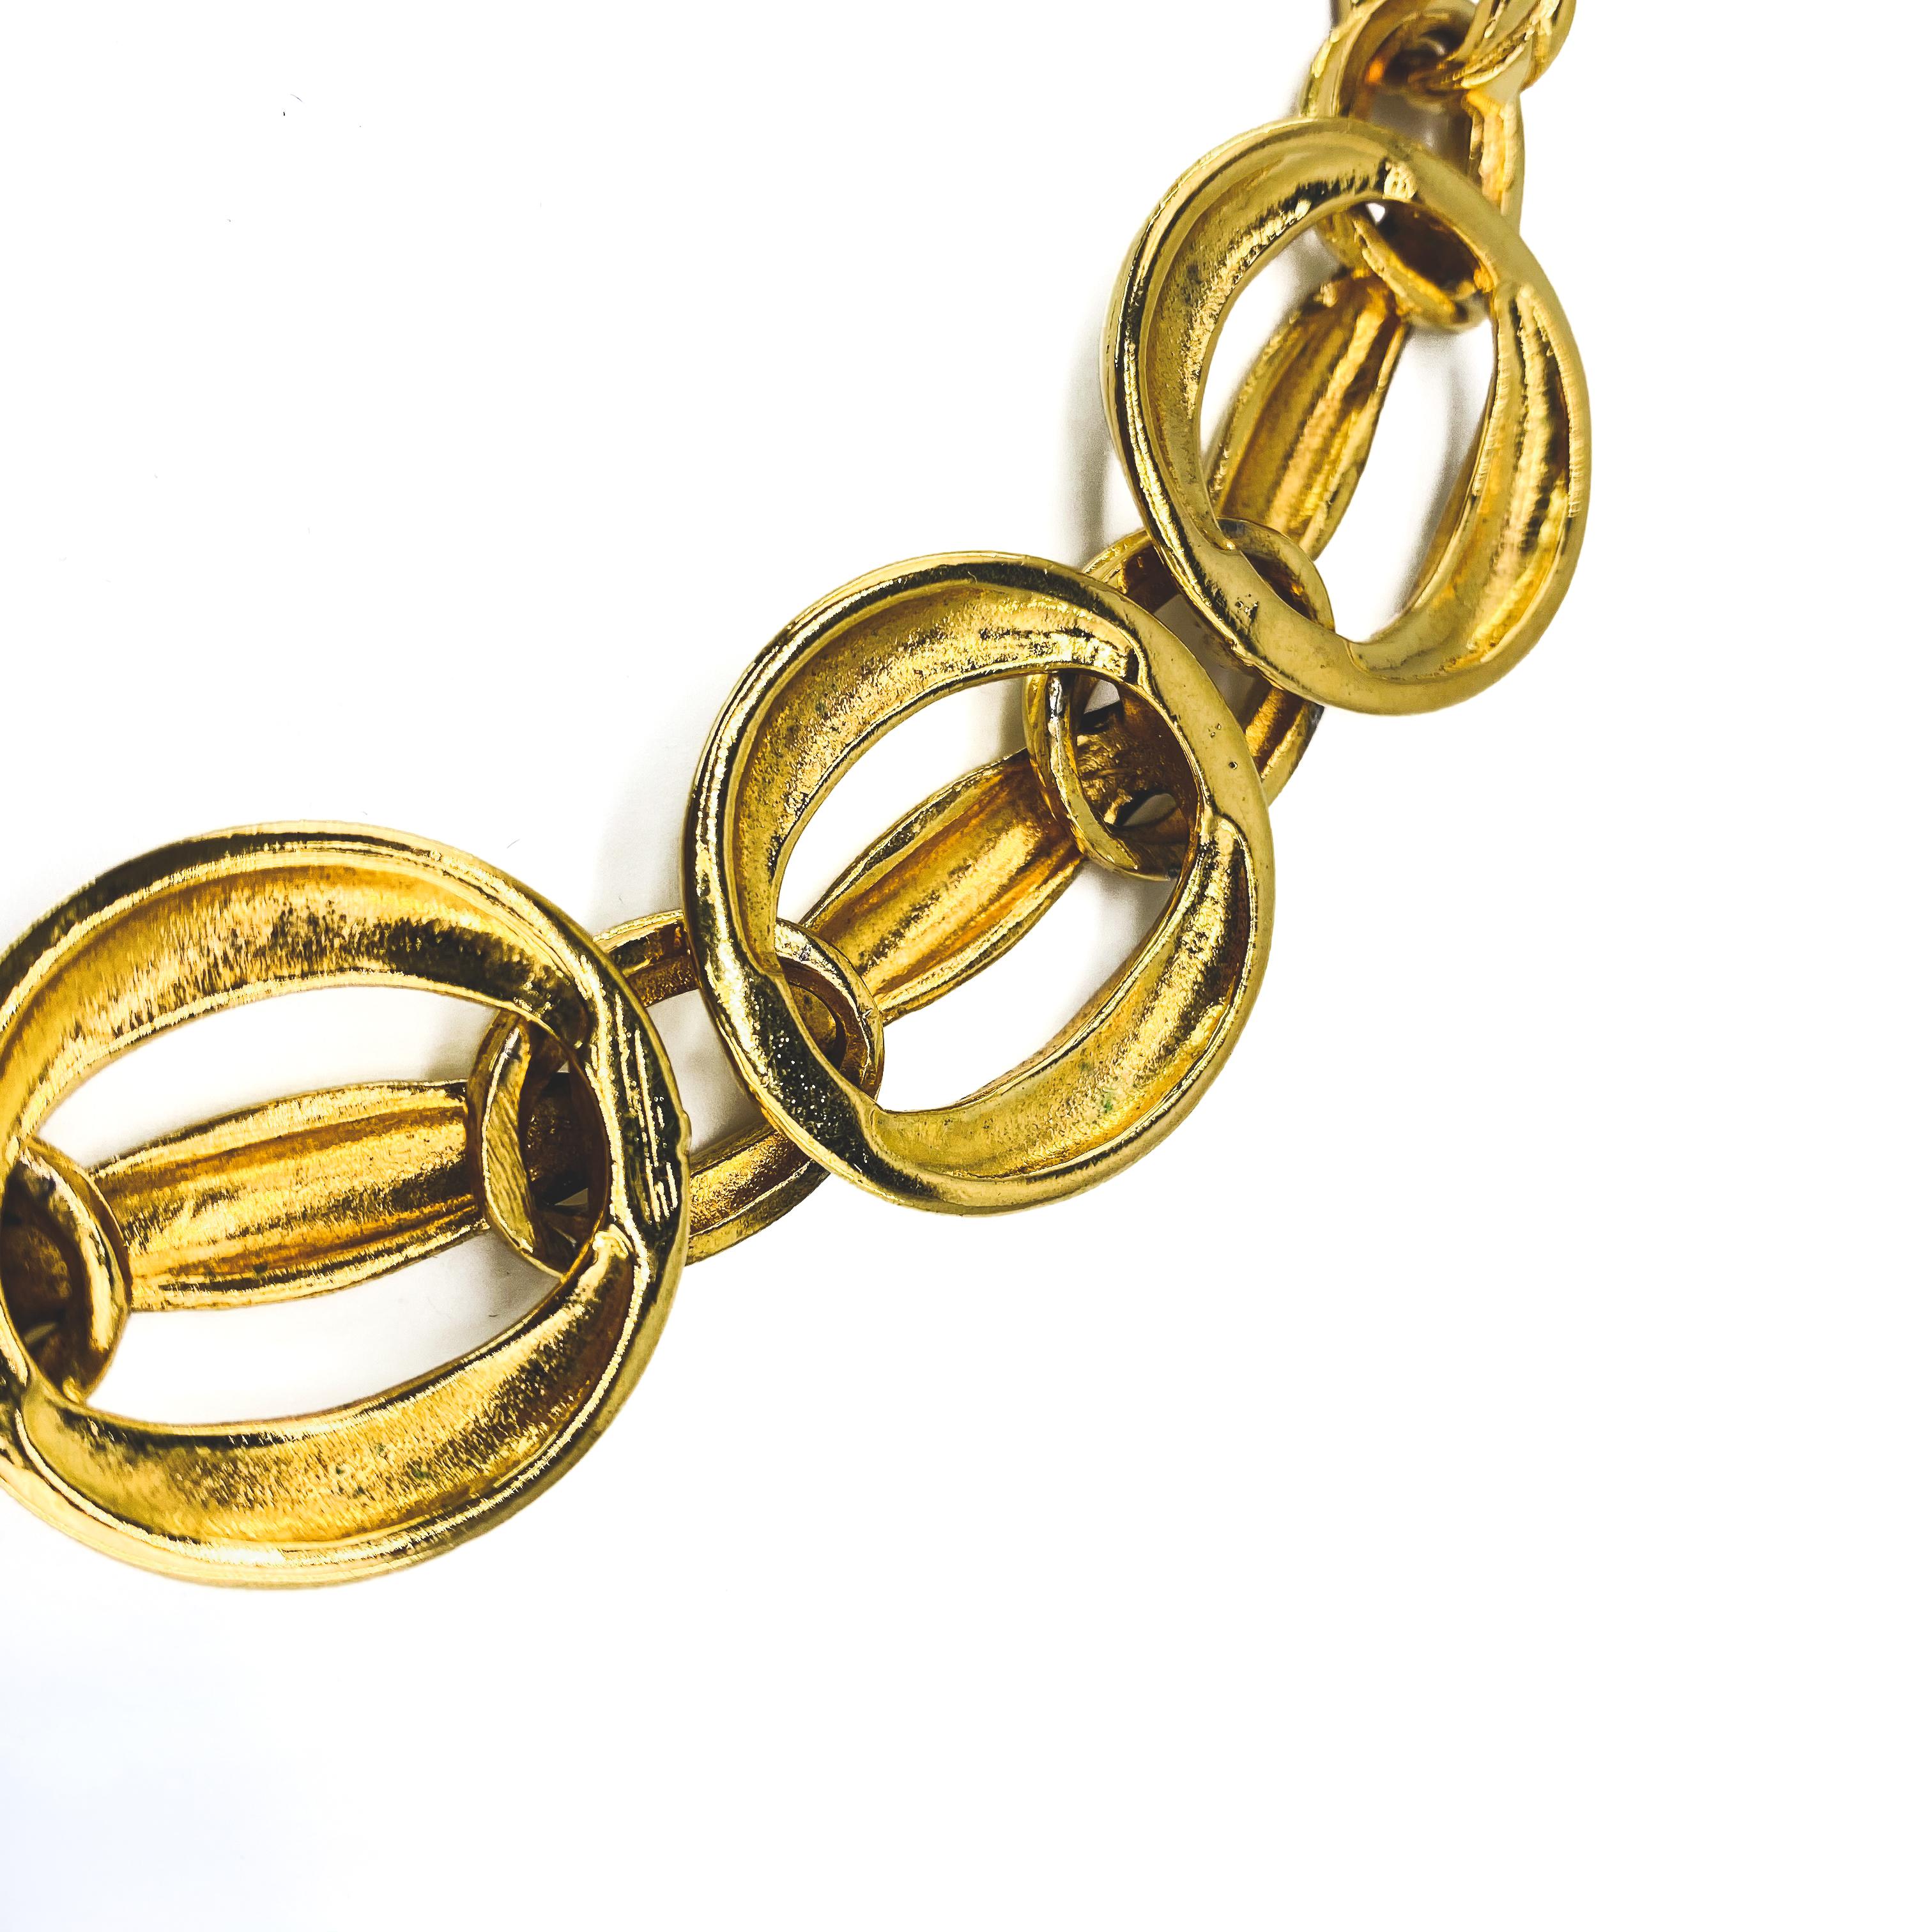 Chanel 1970s Vintage Necklace
Incredible statement vintage necklace from the most desirable fashion label in the world 

Detail
-Made in France in the 1970s
-Crafted from high quality gold plated metal
-Chunky chain links
-Hoof clasp

Size &